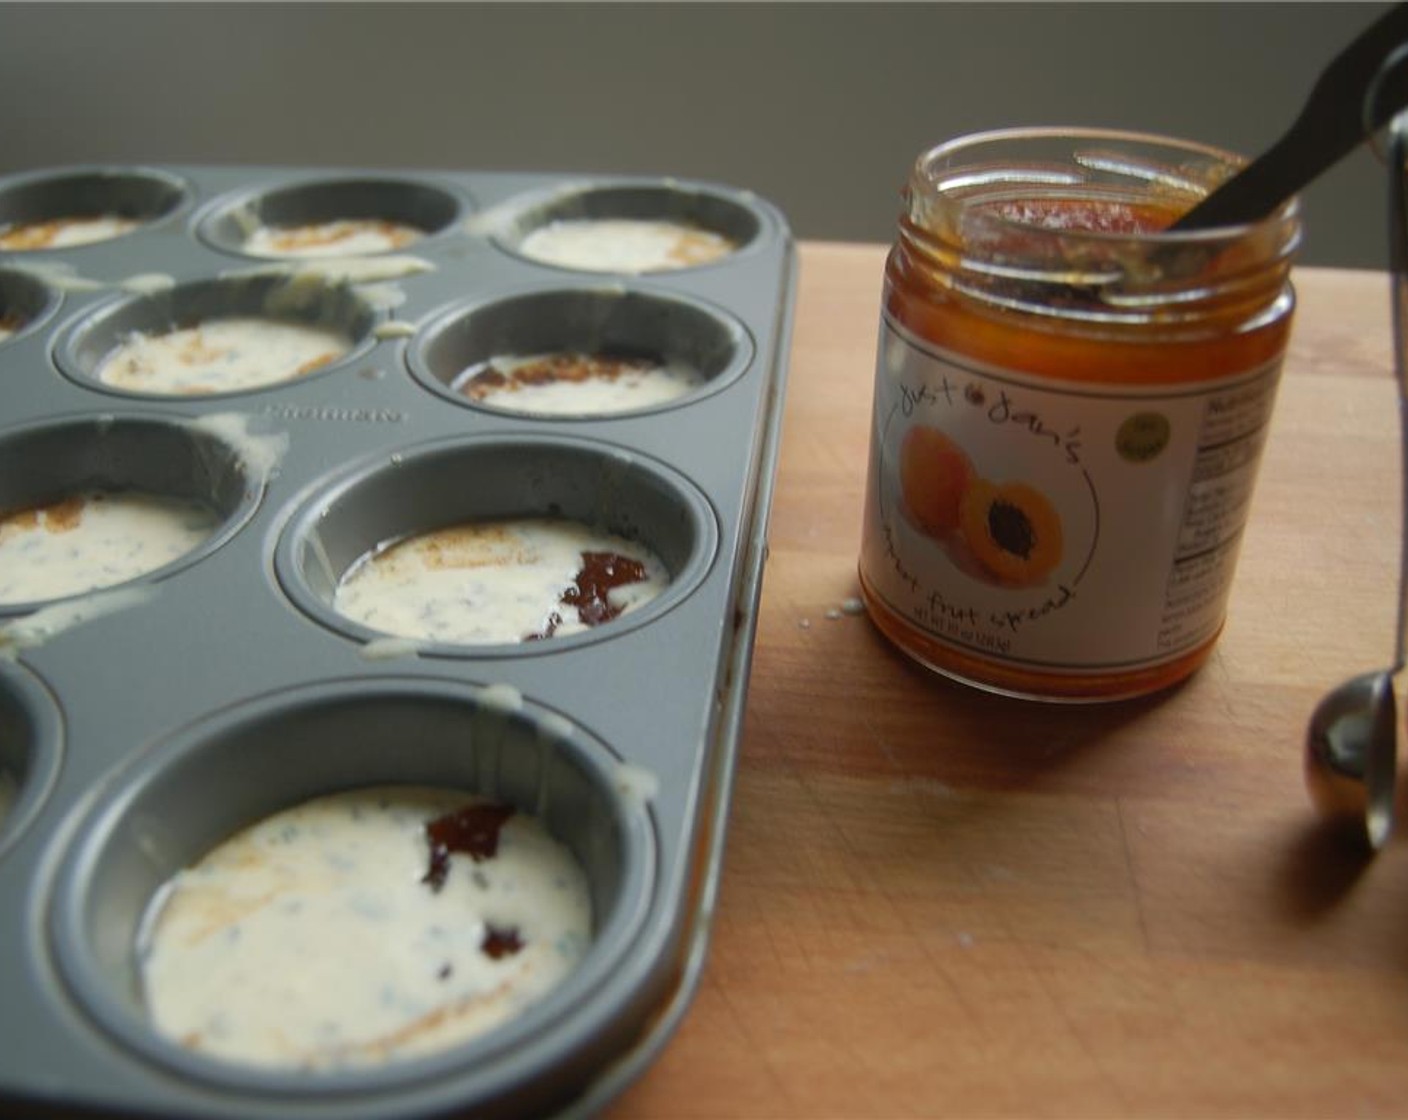 step 5 Stir the batter and divide between muffin cups. You may add a 1/2 tsp of Just Jan’s® Apricot Fruit Spread (to taste) to the batter in each cup.